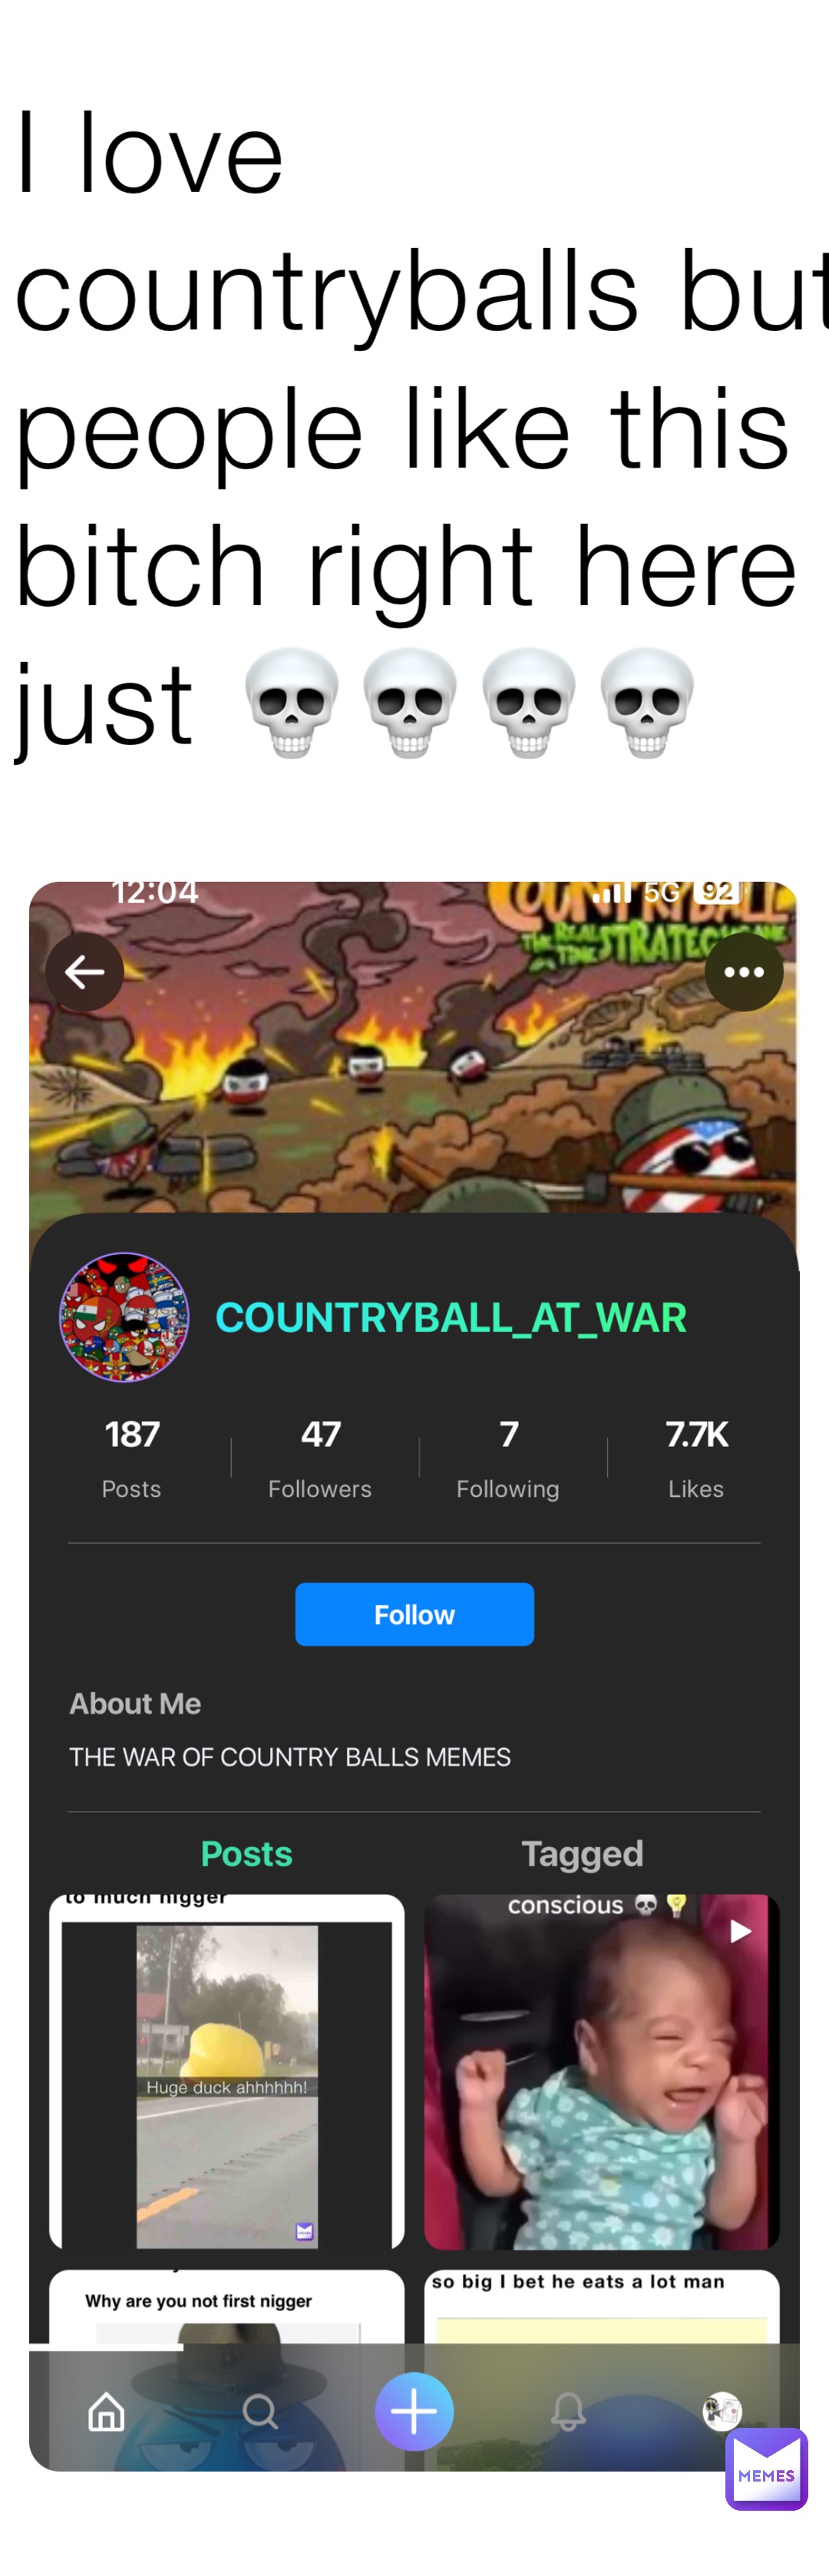 I love countryballs but people like this bitch right here just 💀💀💀💀